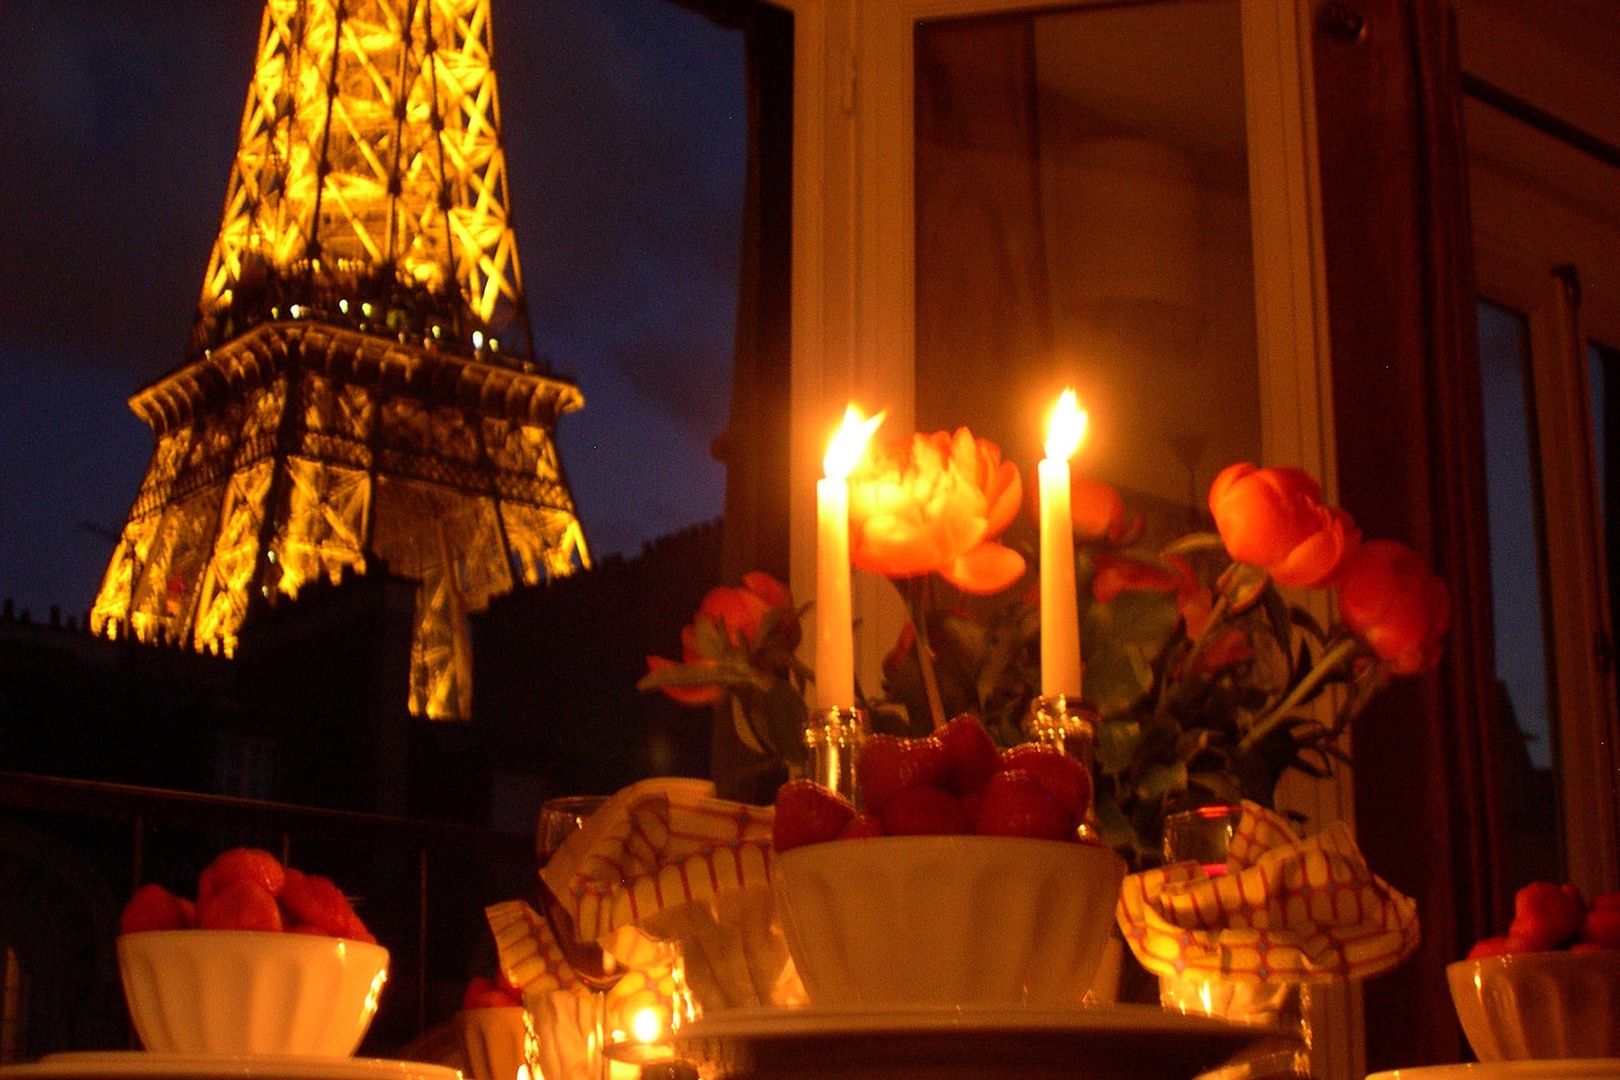 Enjoy a candle-lit dinner at the Chablis with awesome Eiffel Tower views!